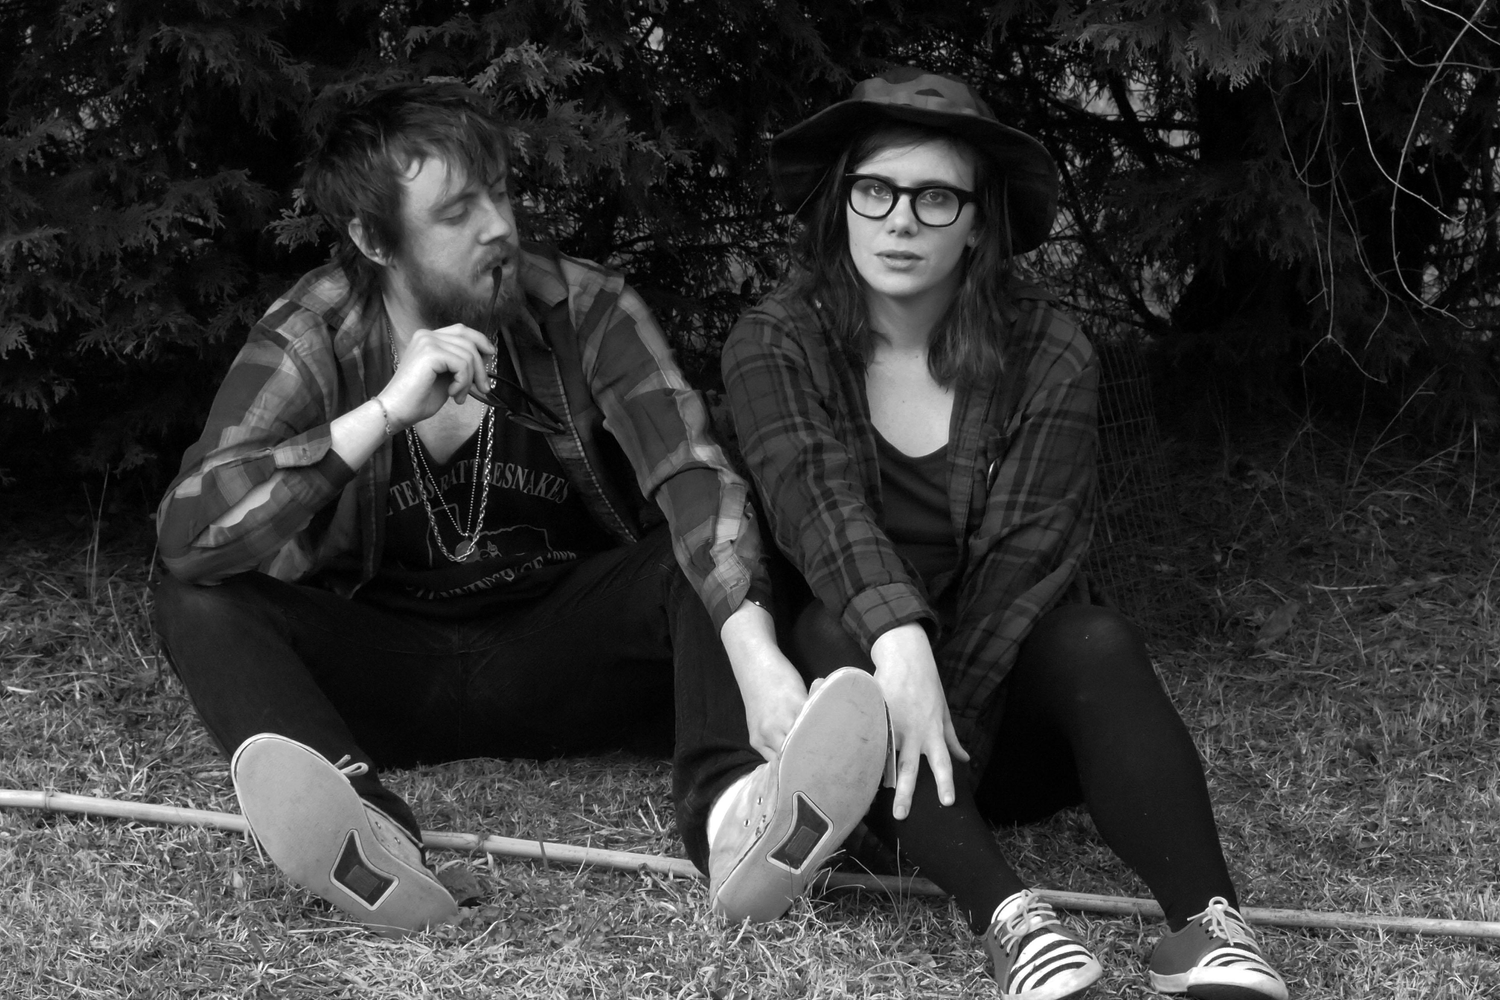 Elvis Depressedly preview new album with ‘Wastes of Time’